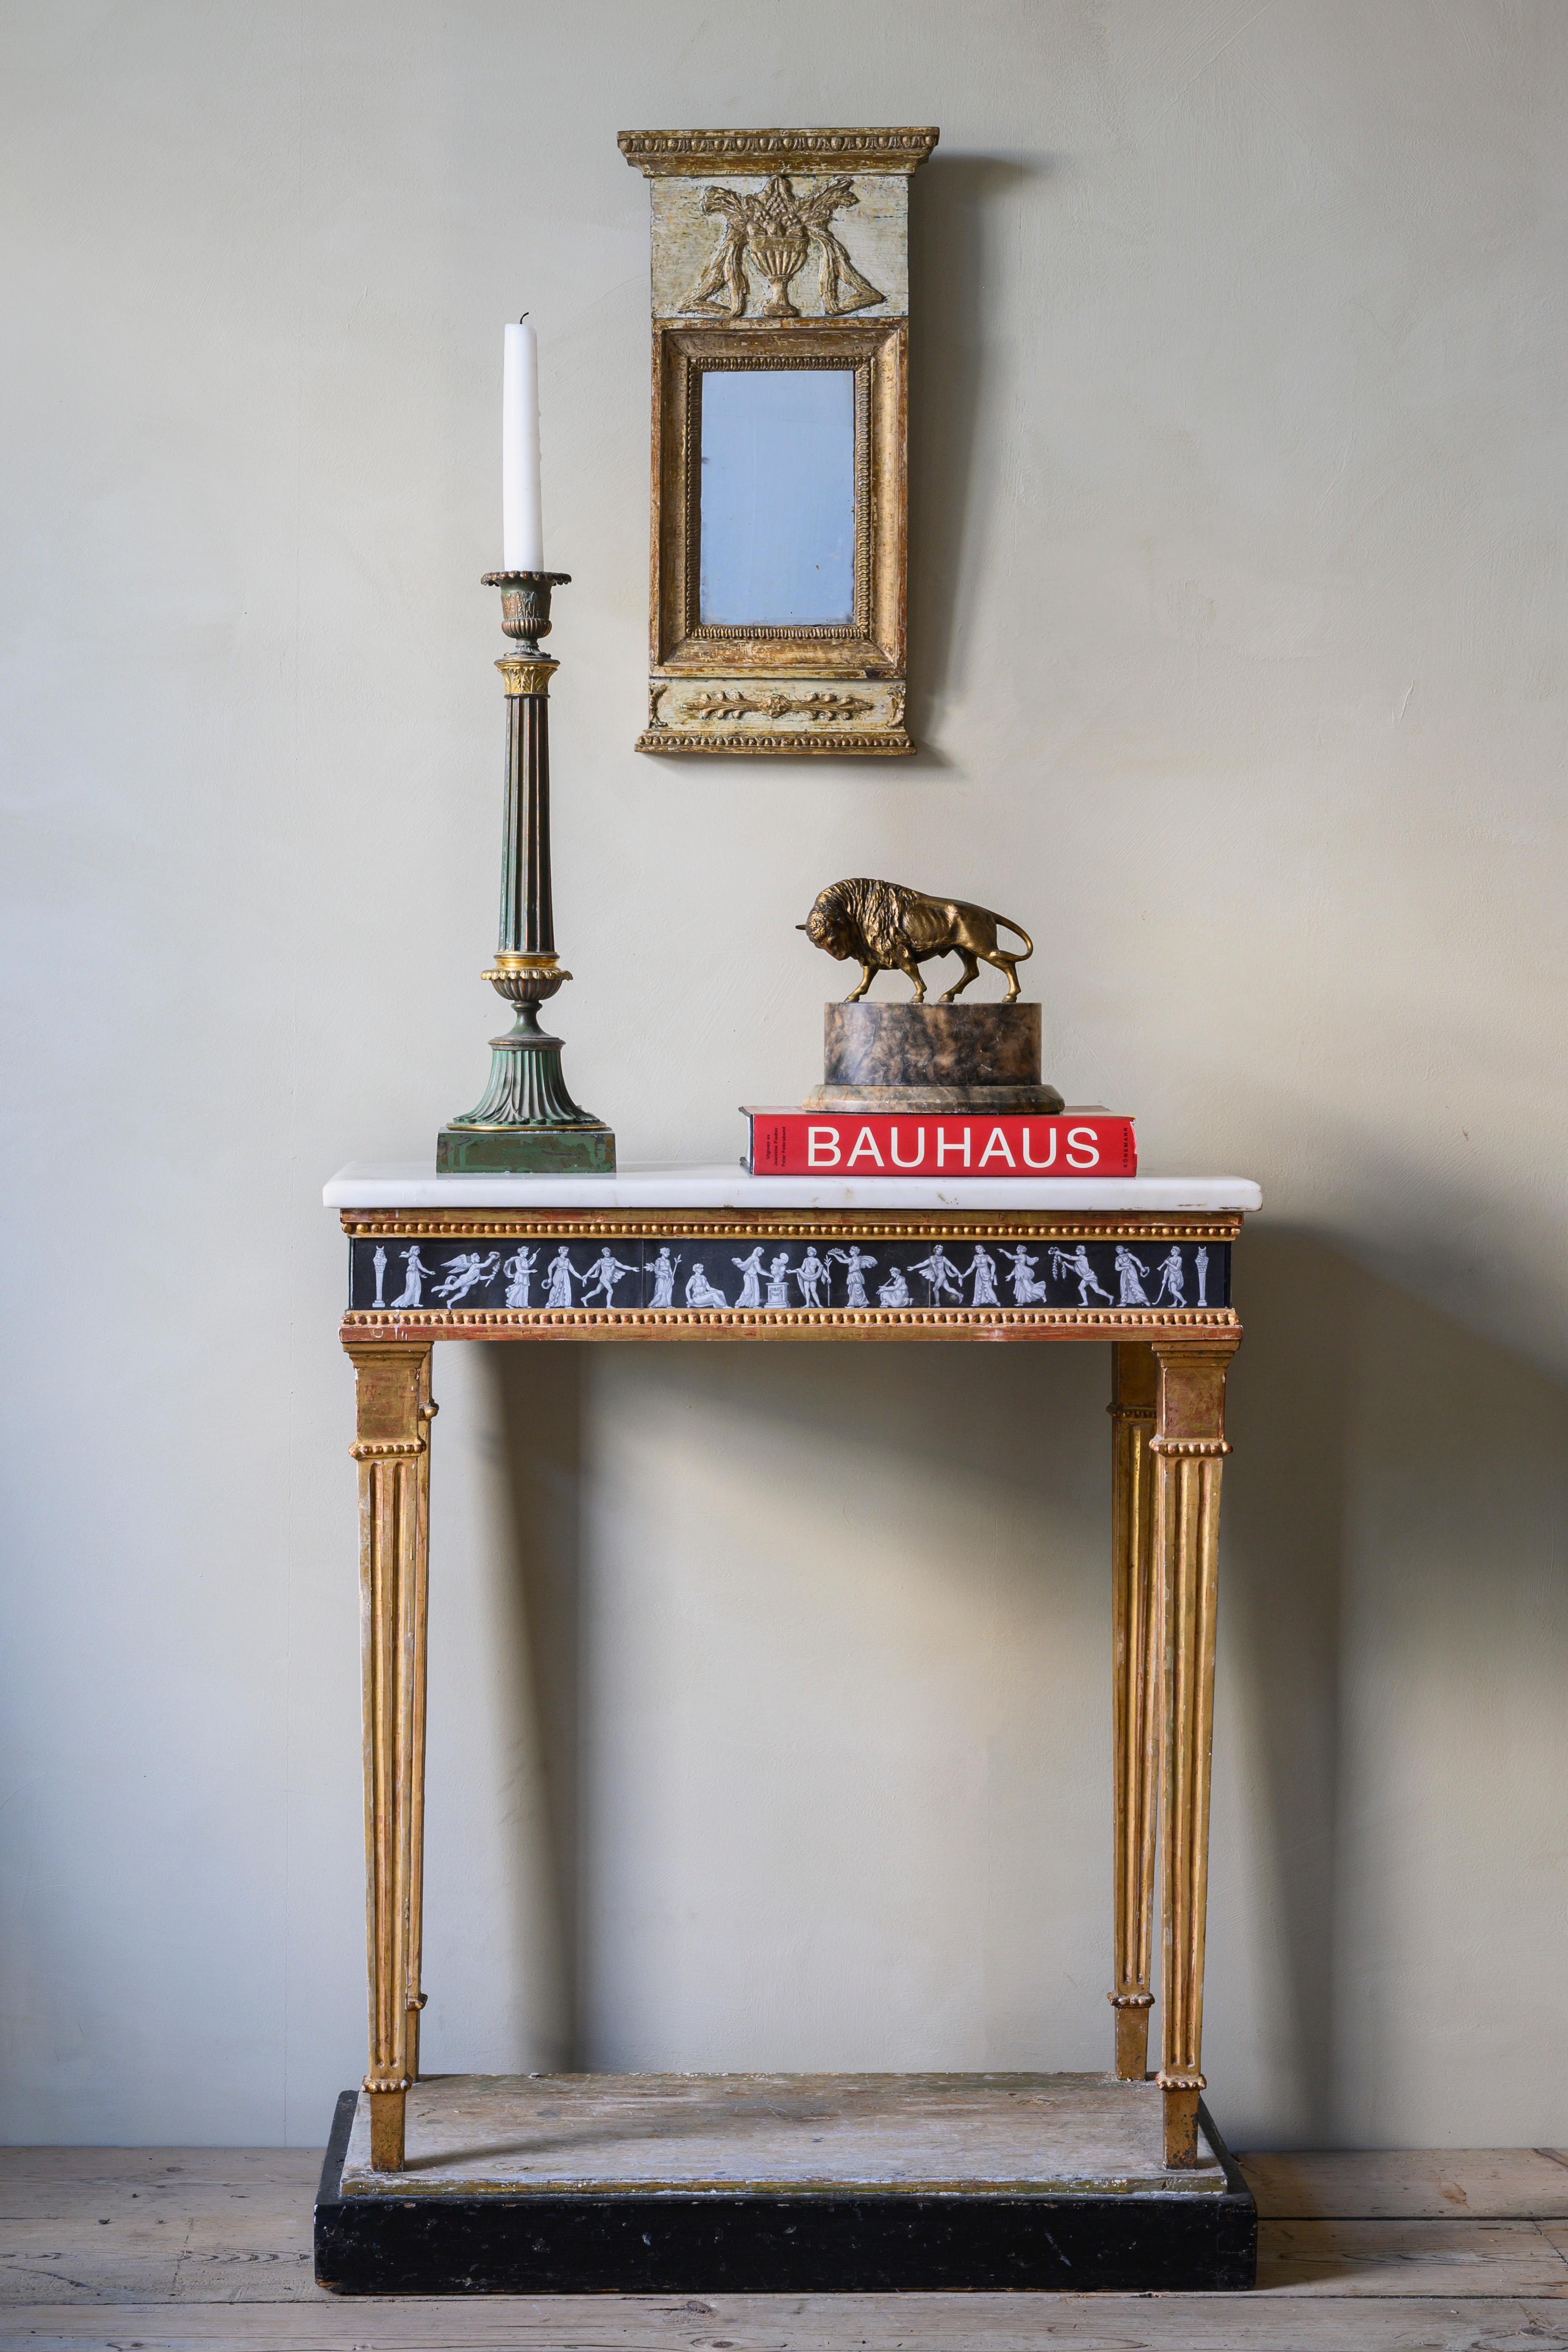 An unusual and fine 19th century late Gustavian early Empire giltwood console table with gouache and Carrara marble top, circa 1815. Very unusual with the gouache extending all the way out to the edges, which adds to the exceptional look of this